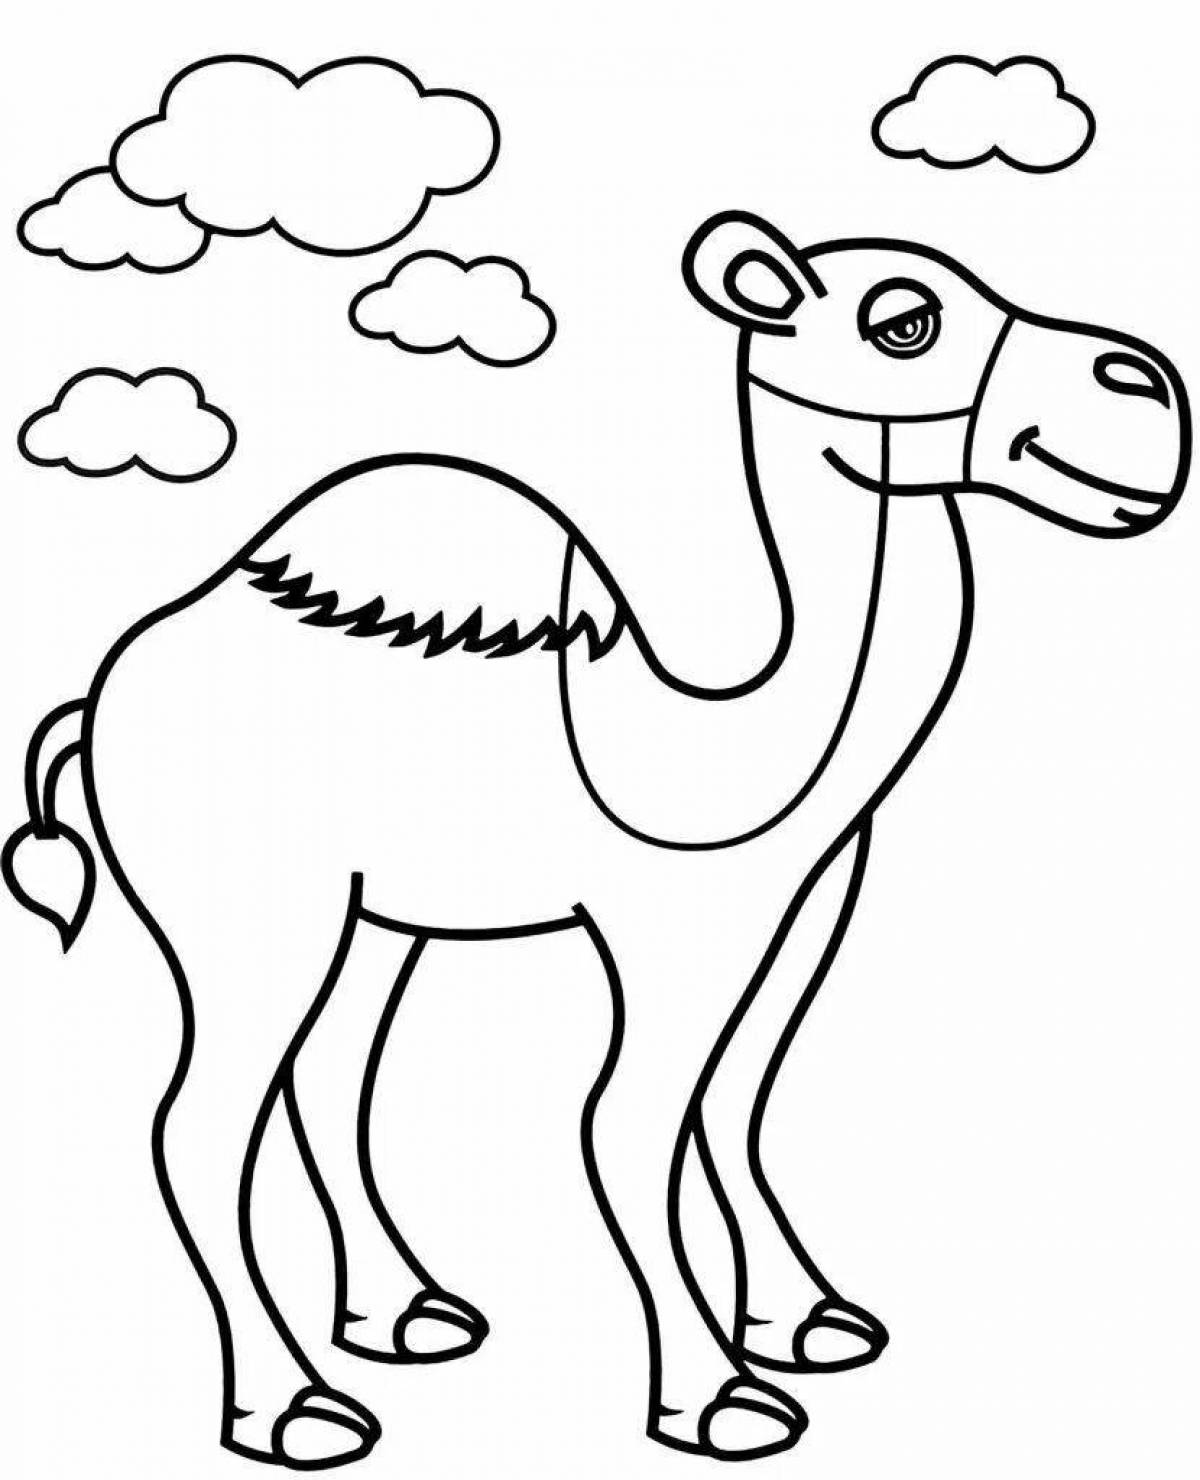 Coloring book joyful camel for children 6-7 years old